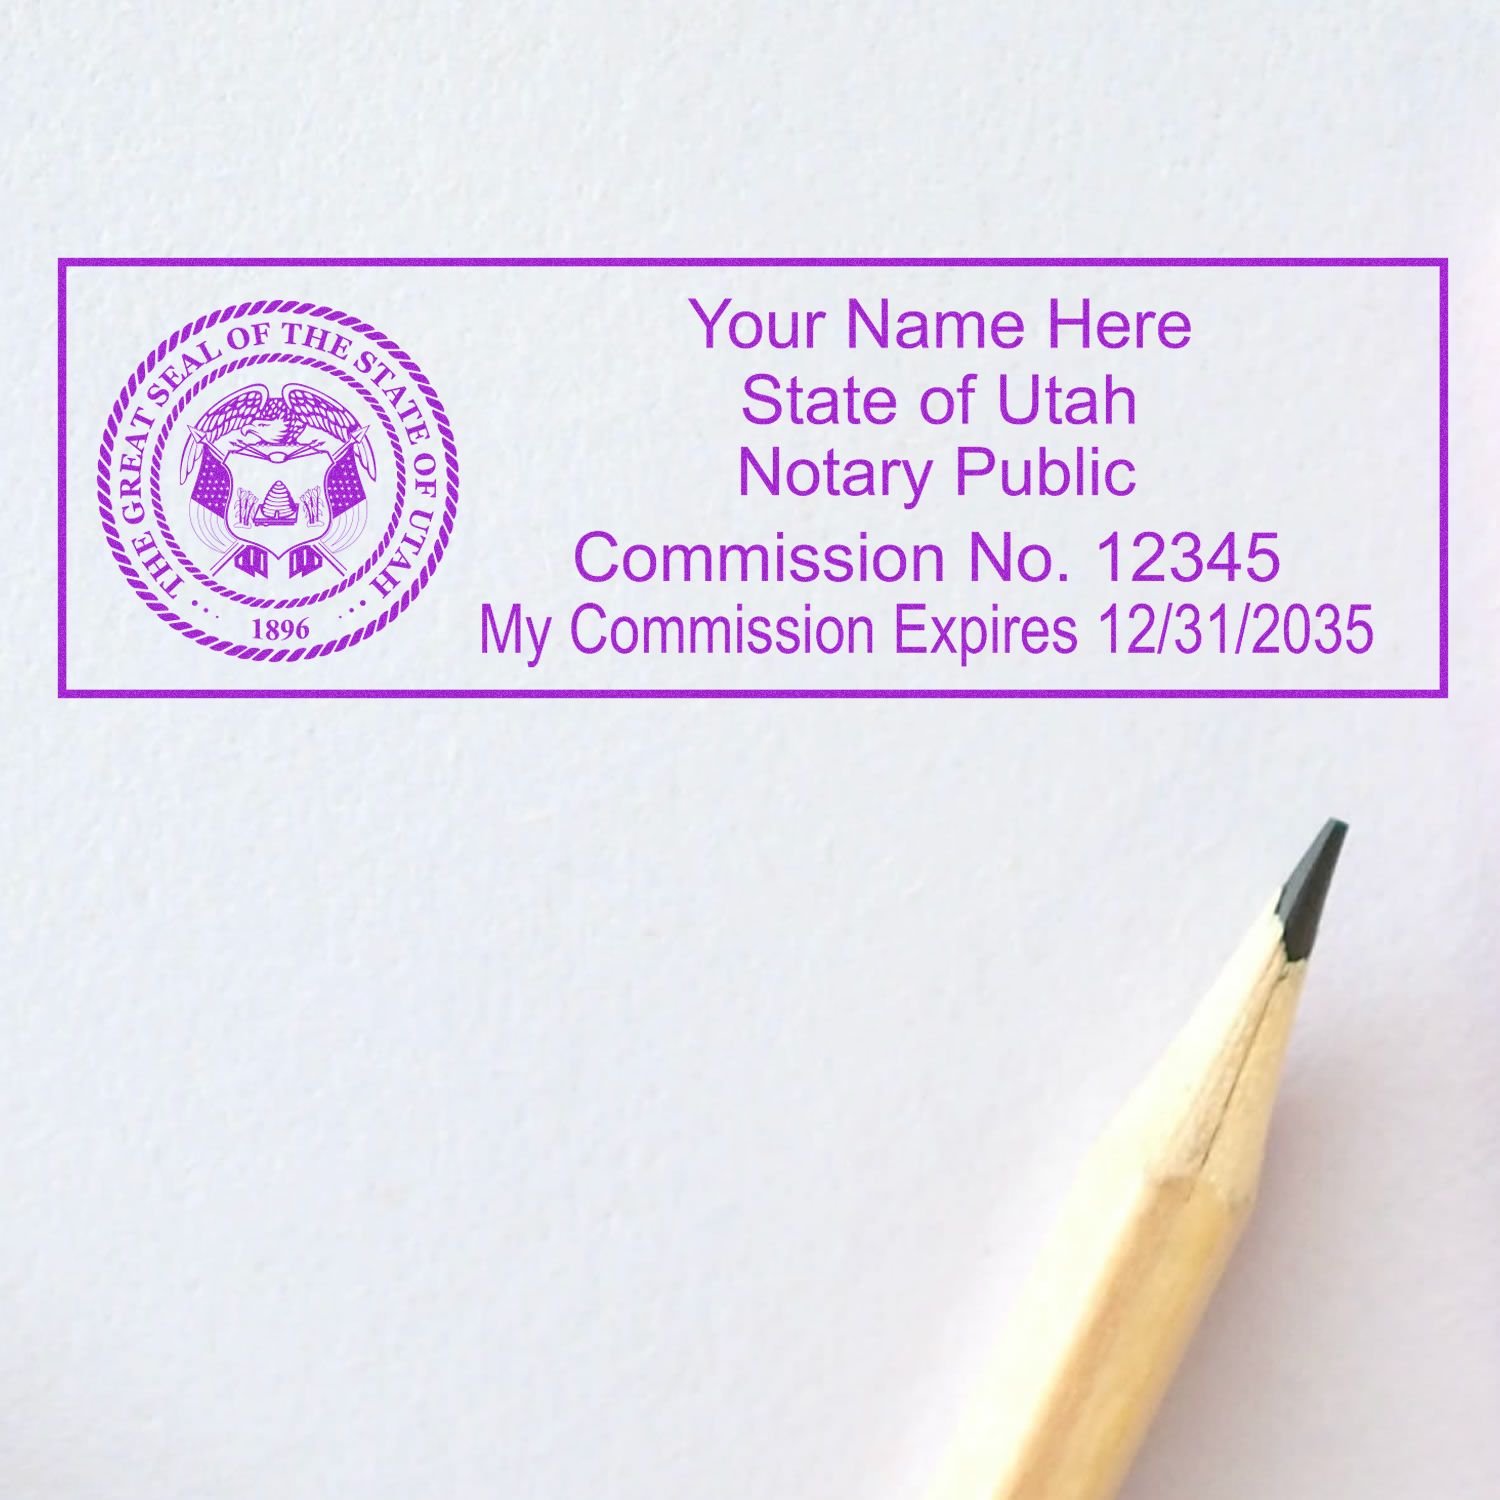 The main image for the Heavy-Duty Utah Rectangular Notary Stamp depicting a sample of the imprint and electronic files